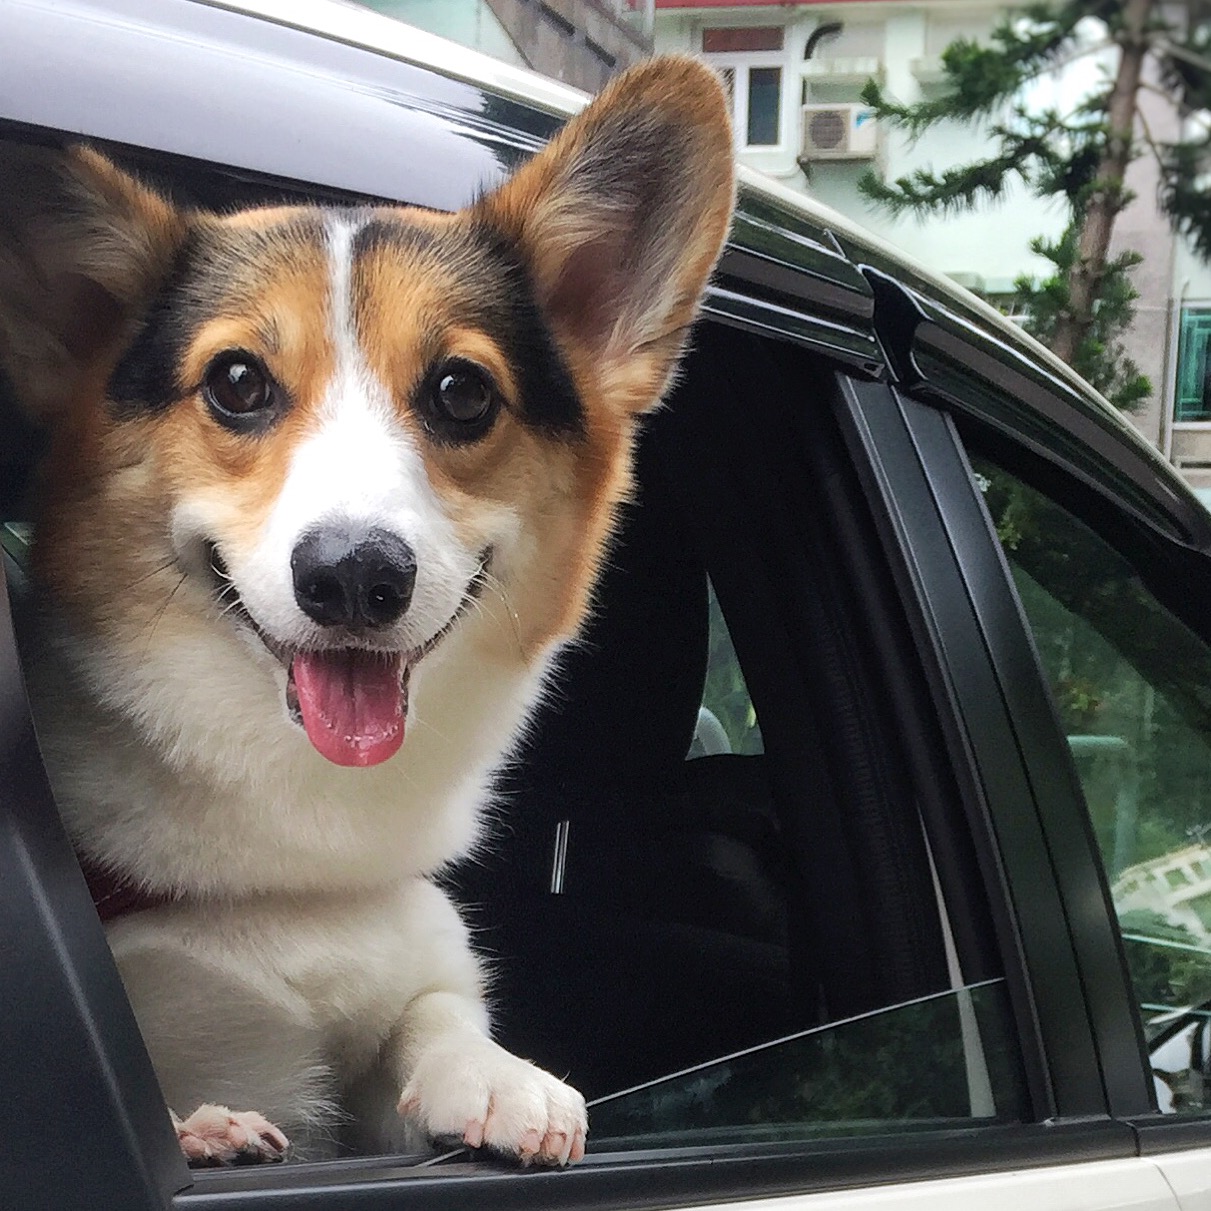 A Corgi in the backseat inside the car while its head is out and smiling